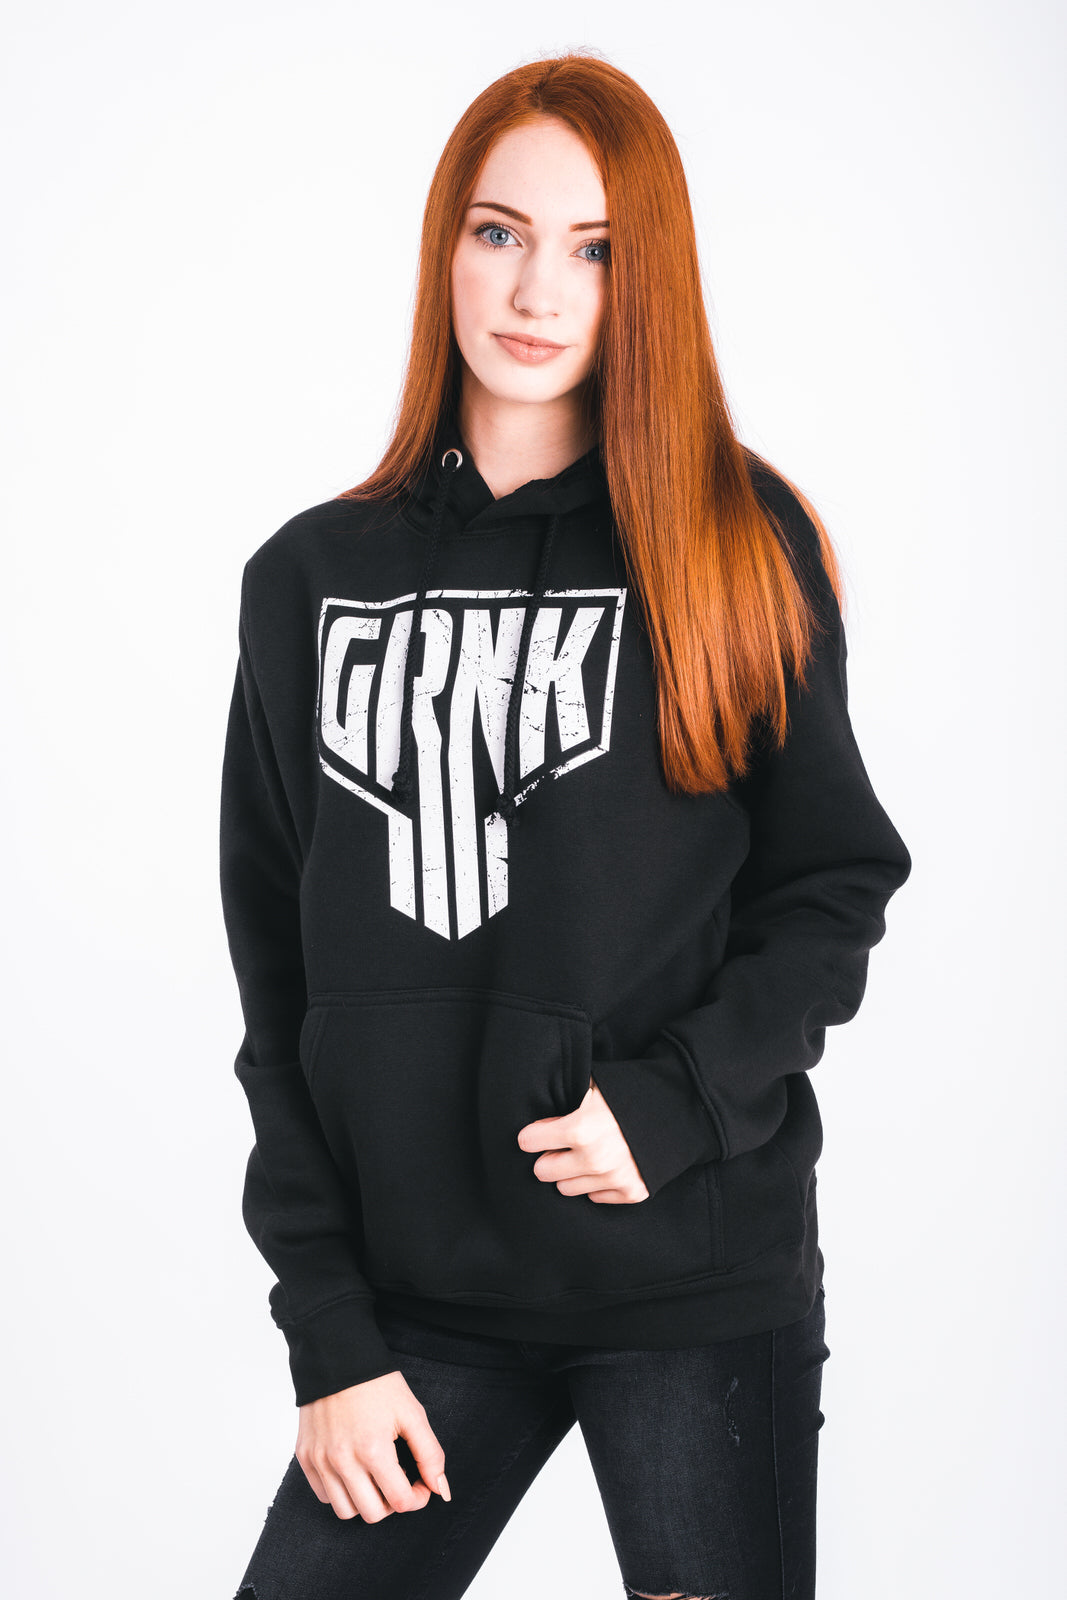 Gronkh Hoodie Signature Collection "Skull" Black Shooting